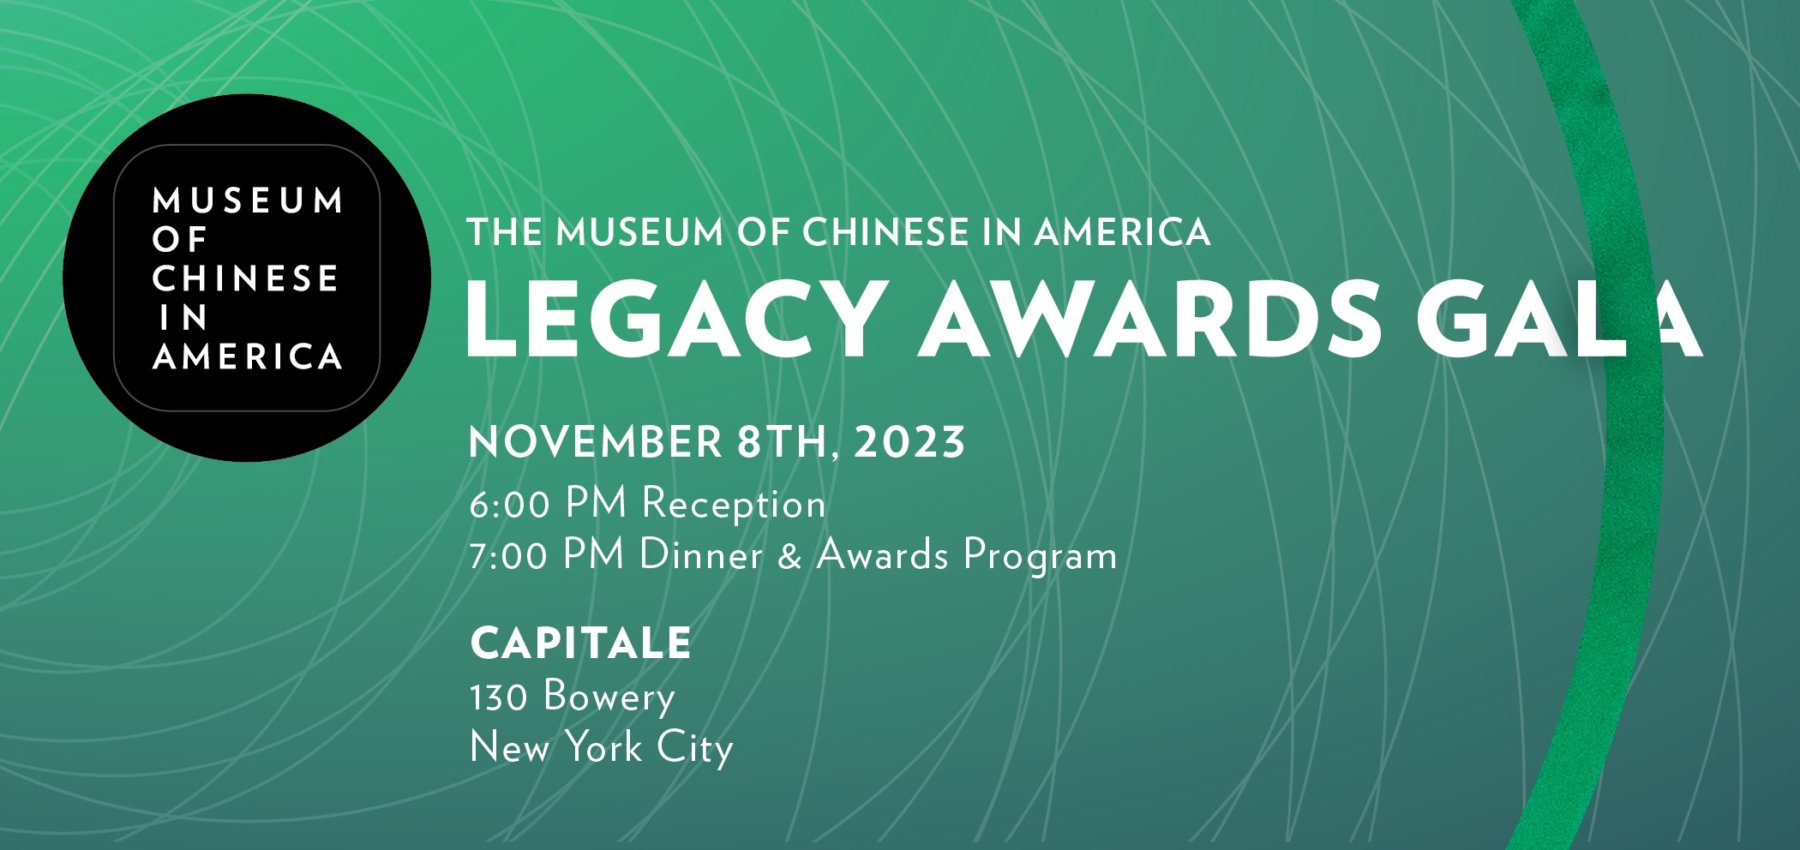 LEGACY AWARDS GALA 2023 – Museum of Chinese in America